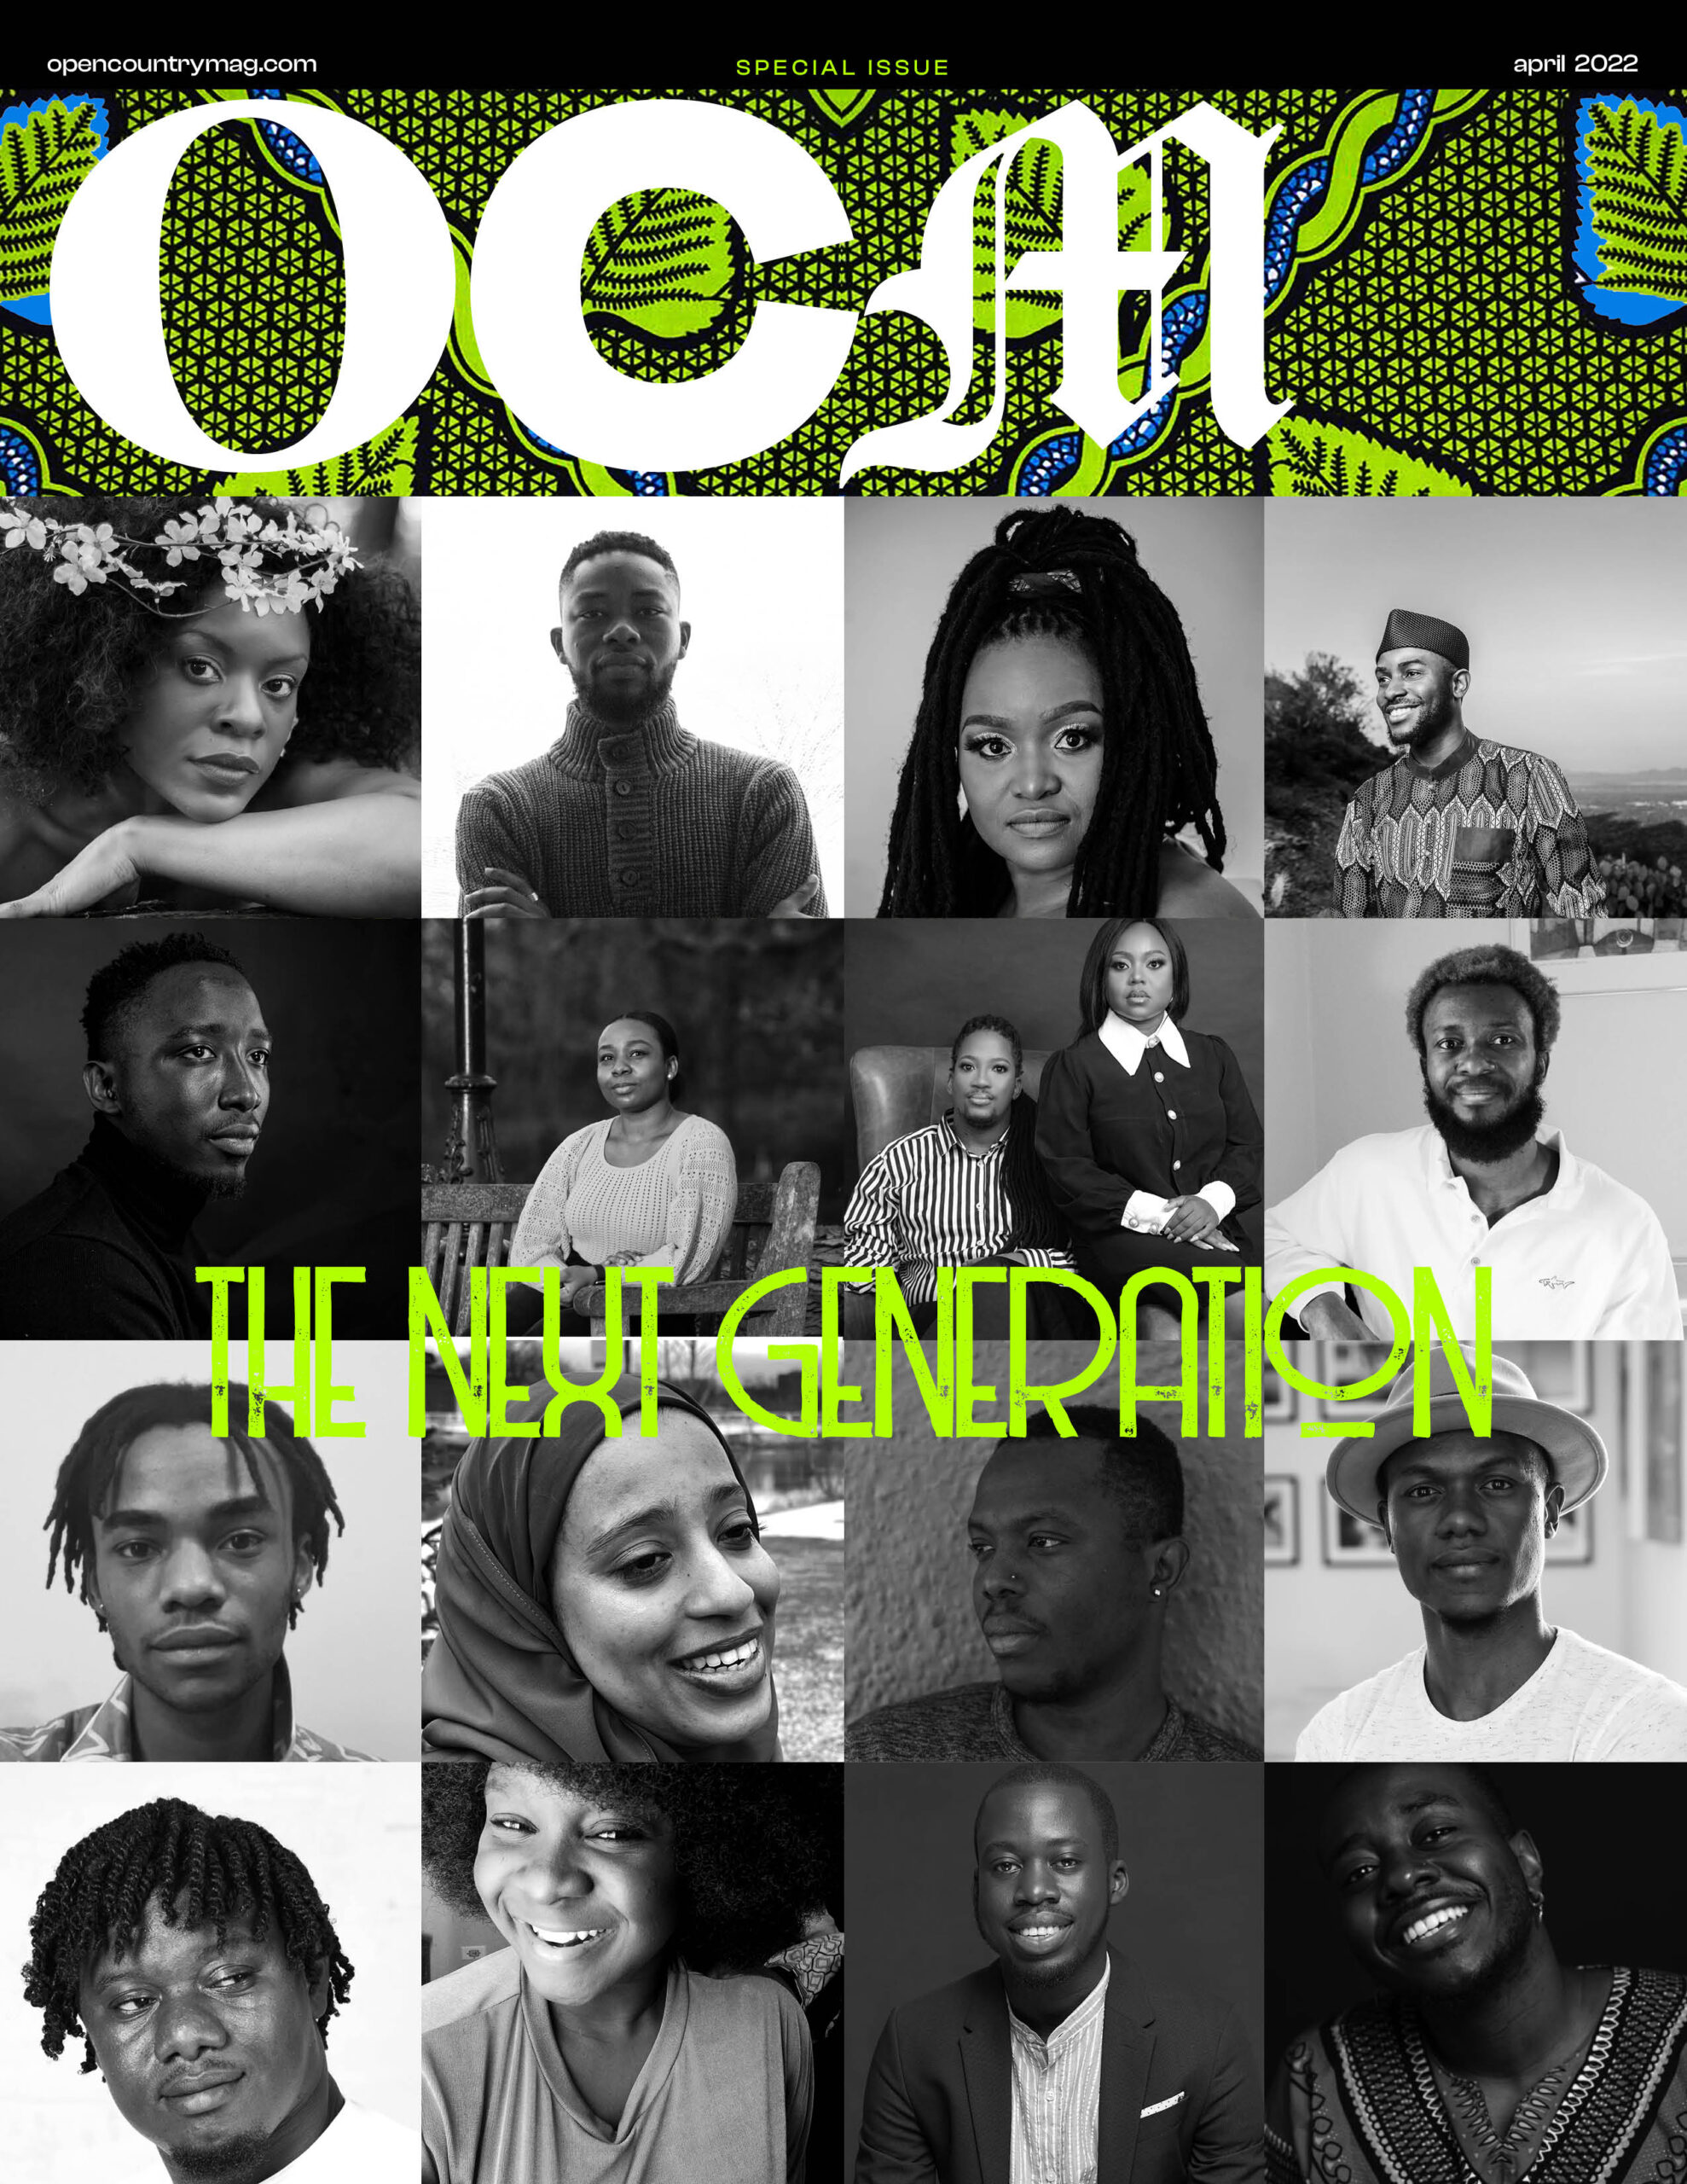 Open Country Mag - The Next Generation of African Literature Covers Open Country Mag. First cover designed by Emmimade Studio.